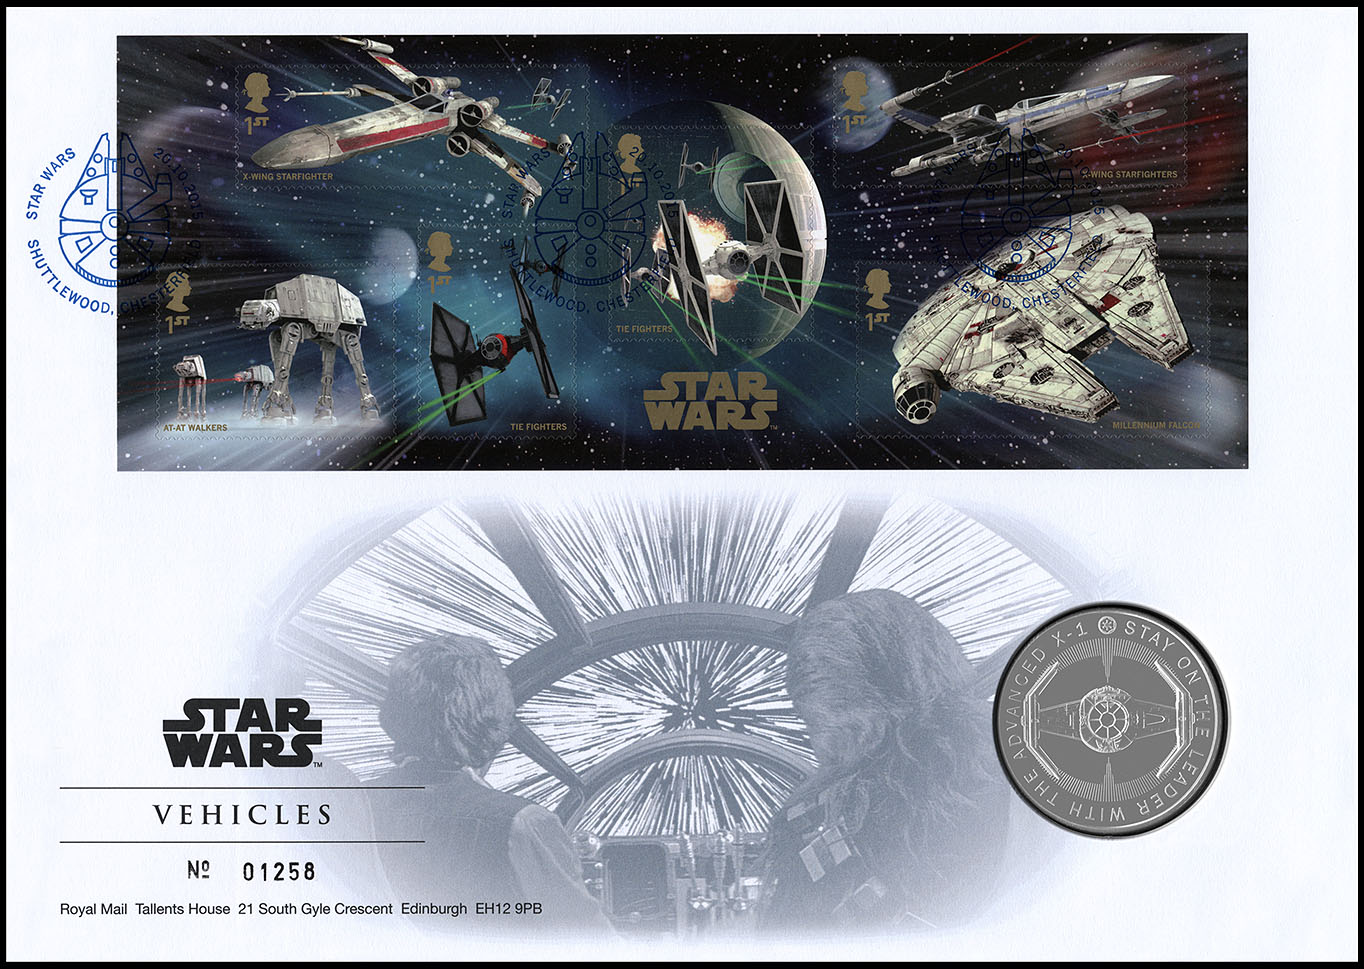 http://www.fandom.ru/about_fan/stamps/cover_greatbritain_2015_starwars_fdc_medal_1_can_chesterfield_2015_10_20.jpg